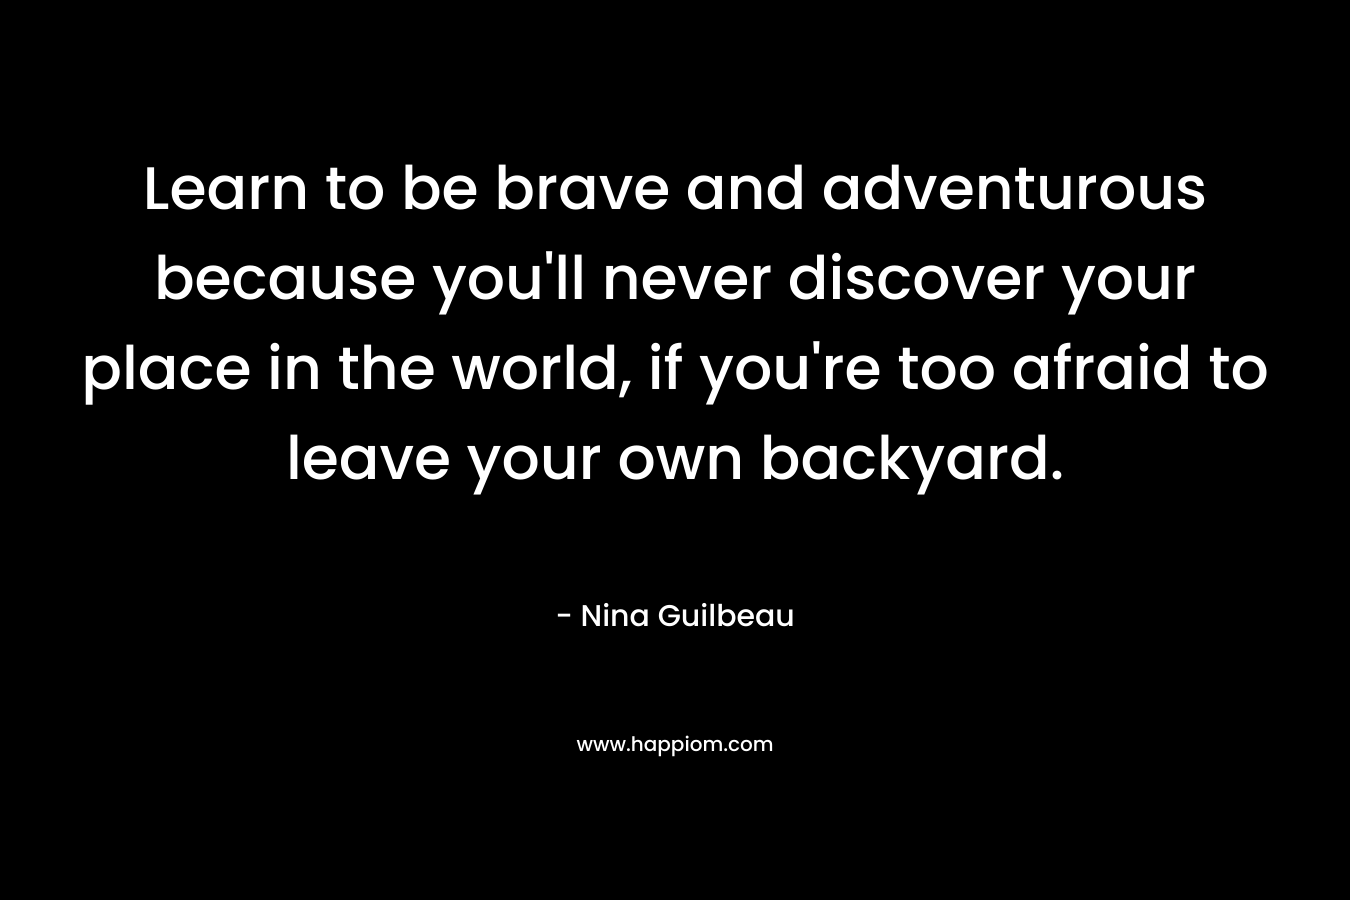 Learn to be brave and adventurous because you’ll never discover your place in the world, if you’re too afraid to leave your own backyard. – Nina Guilbeau